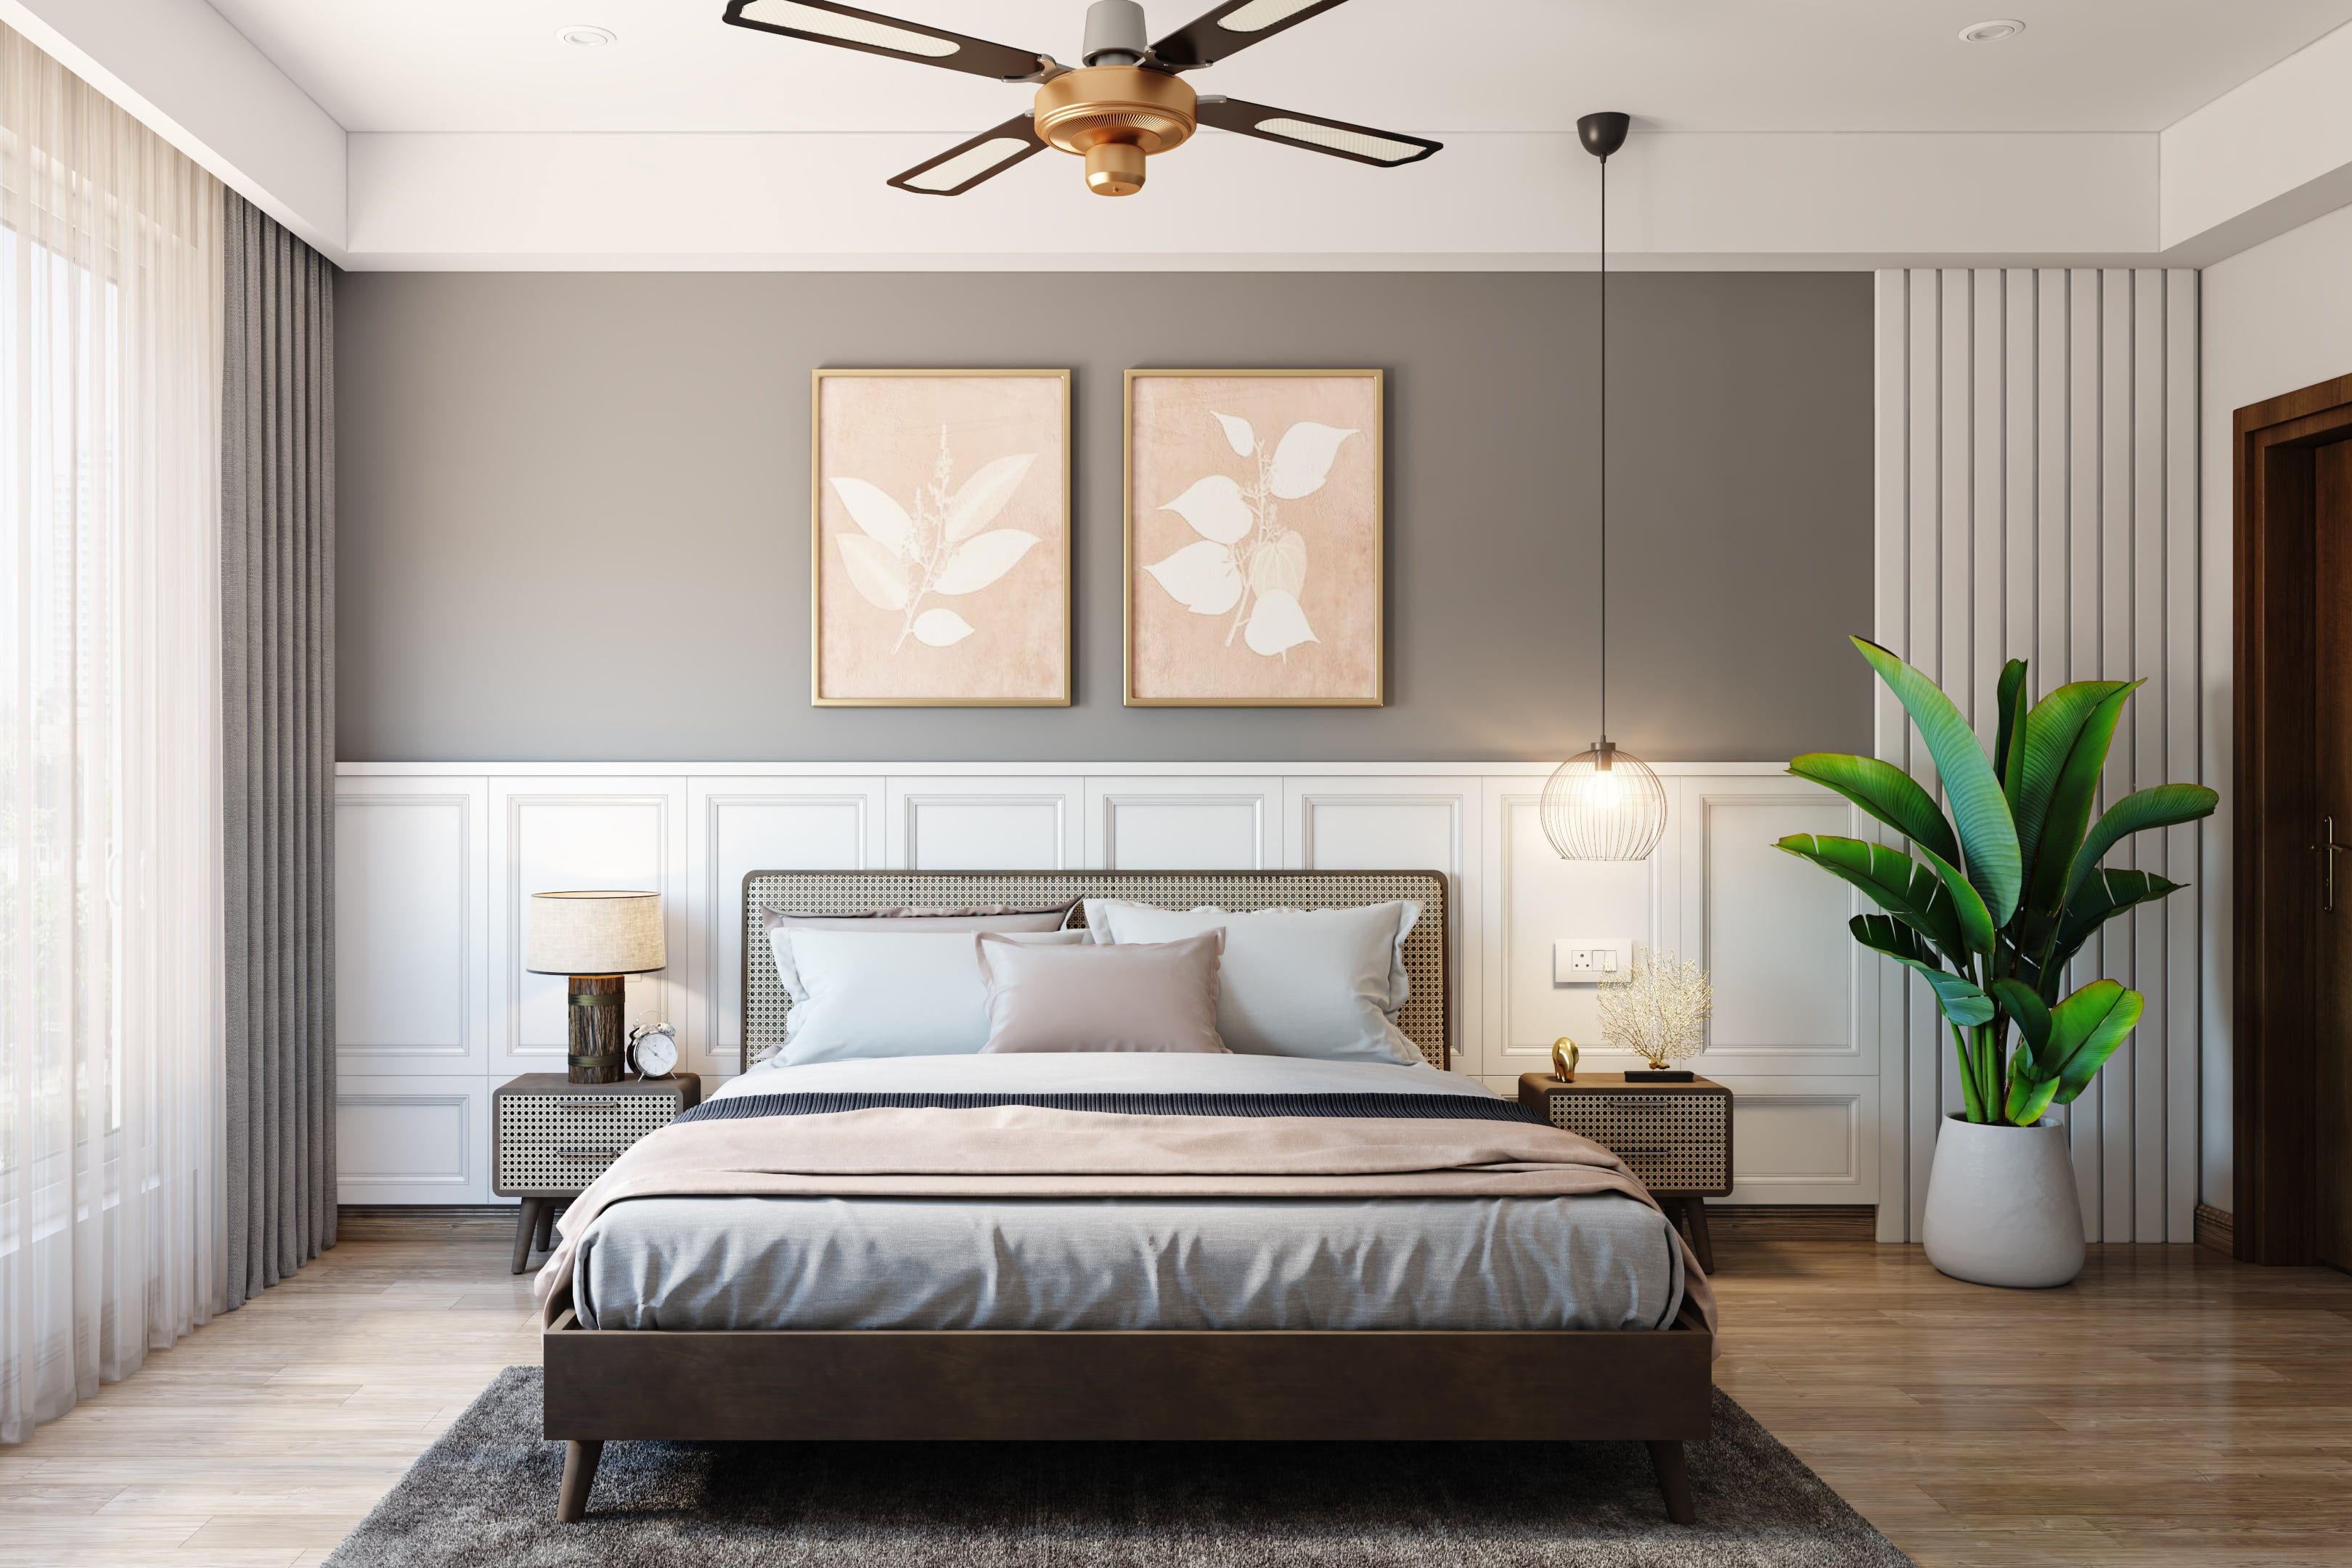 Contemporary Bedroom Design With Grey Upholstery